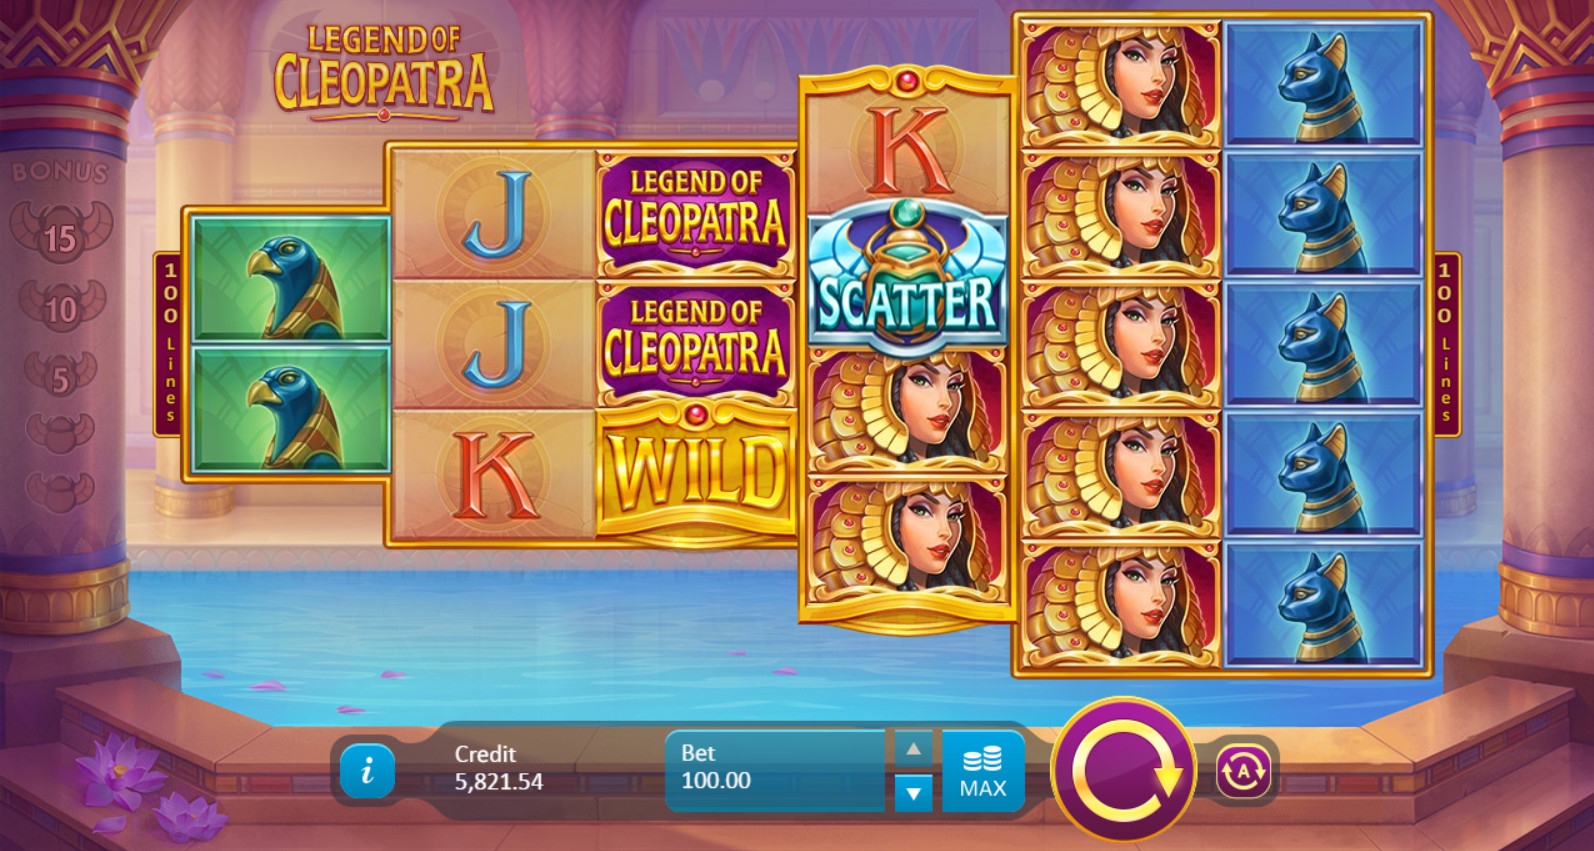 Legend of Cleopatra (Legend of Cleopatra) from category Slots